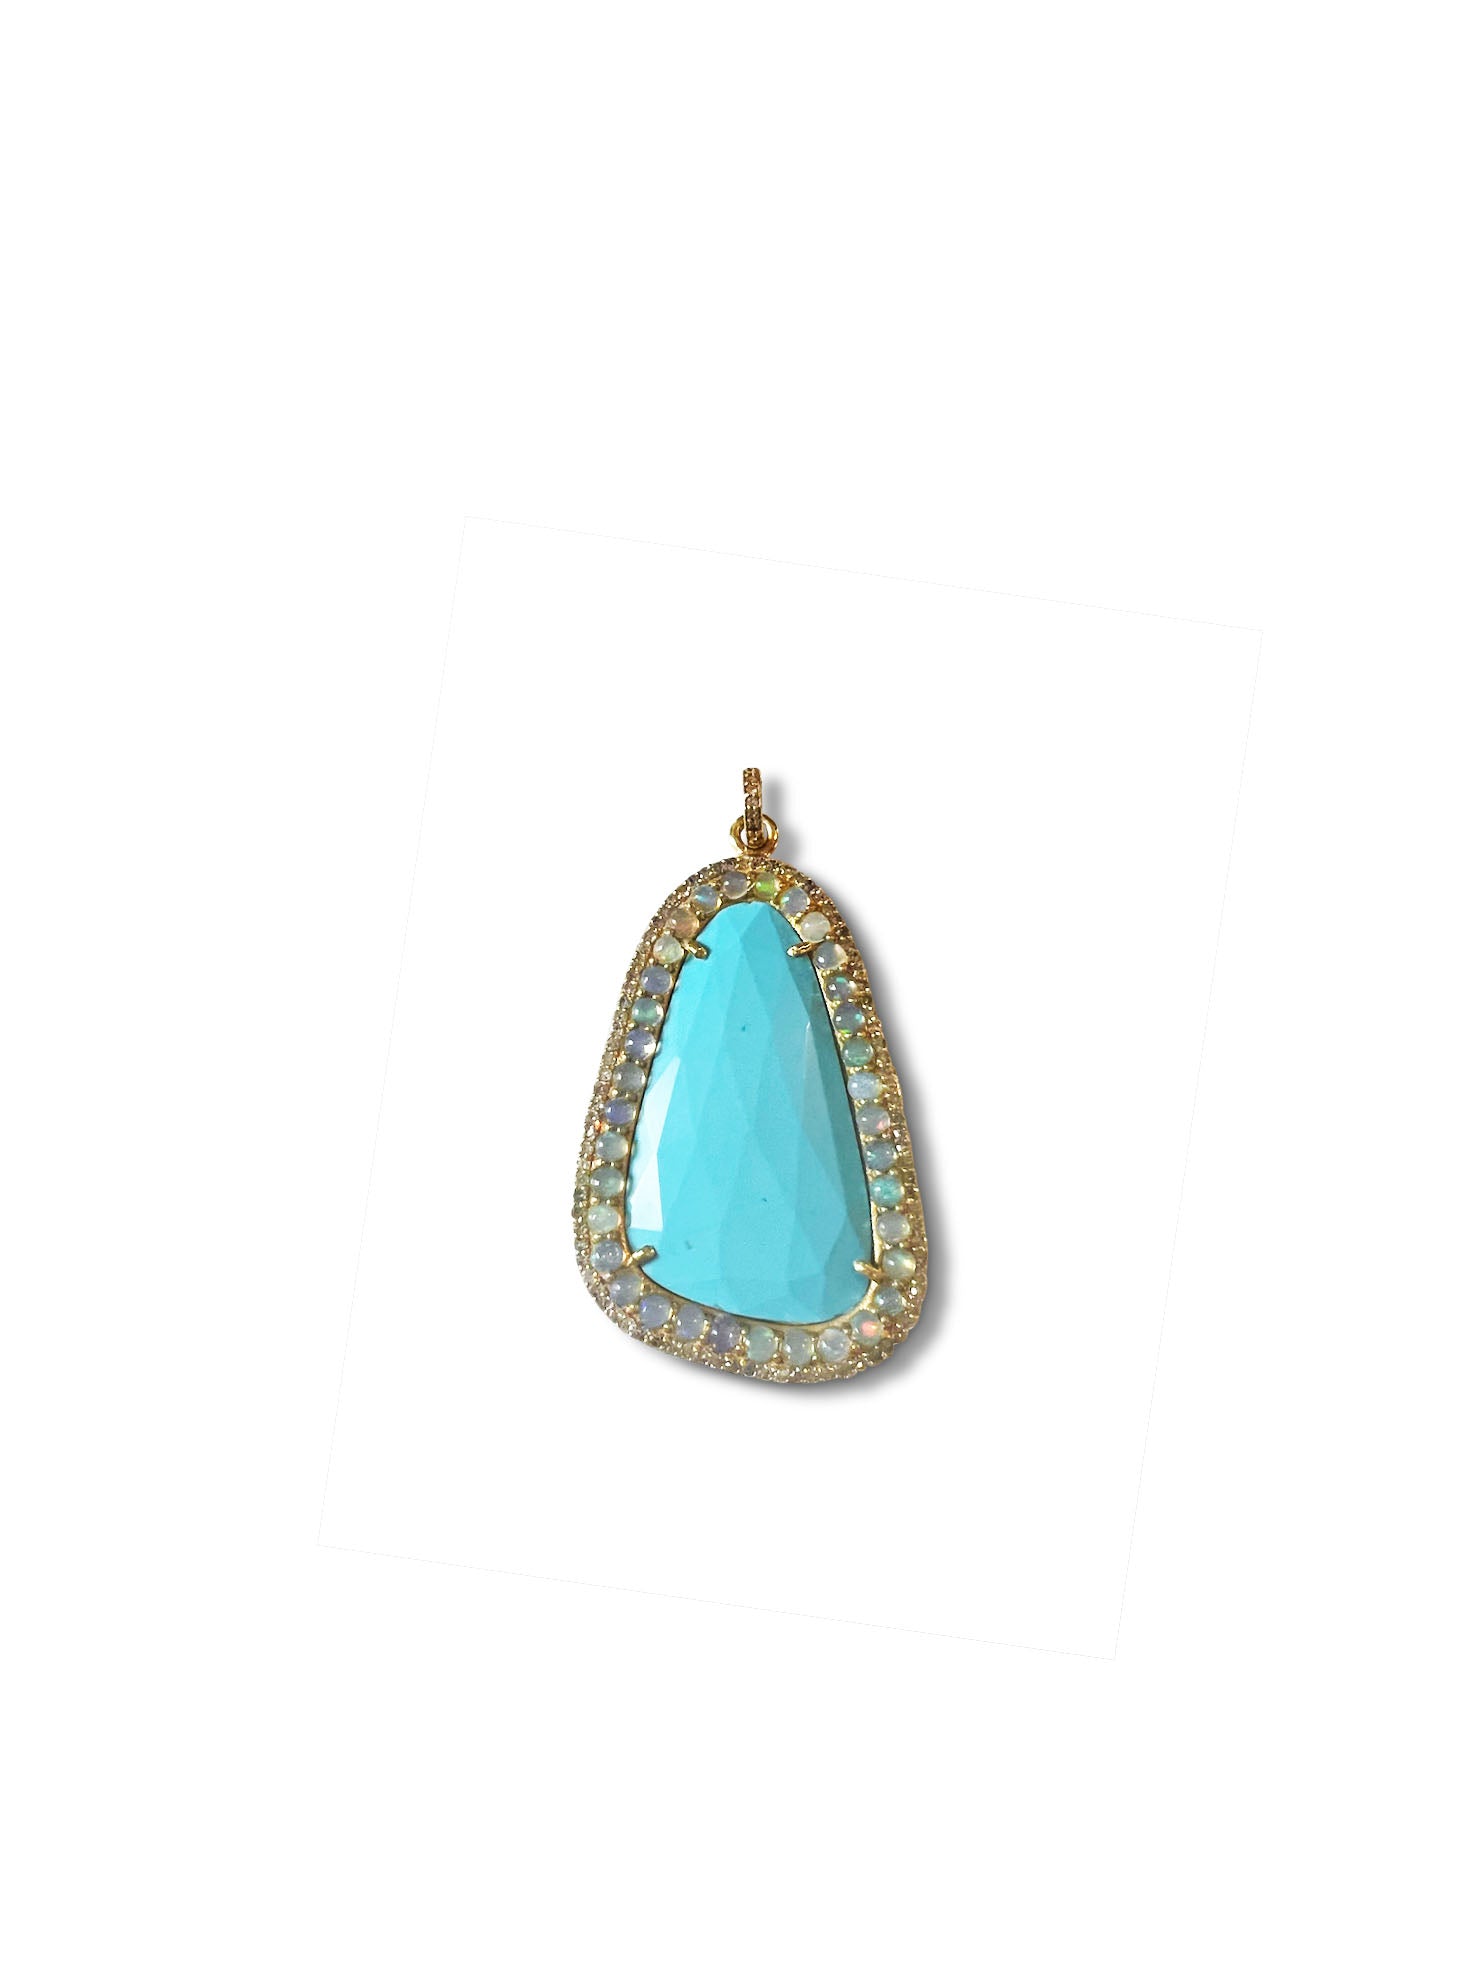 Turquoise set in Opals and Pave Diamonds in Brass